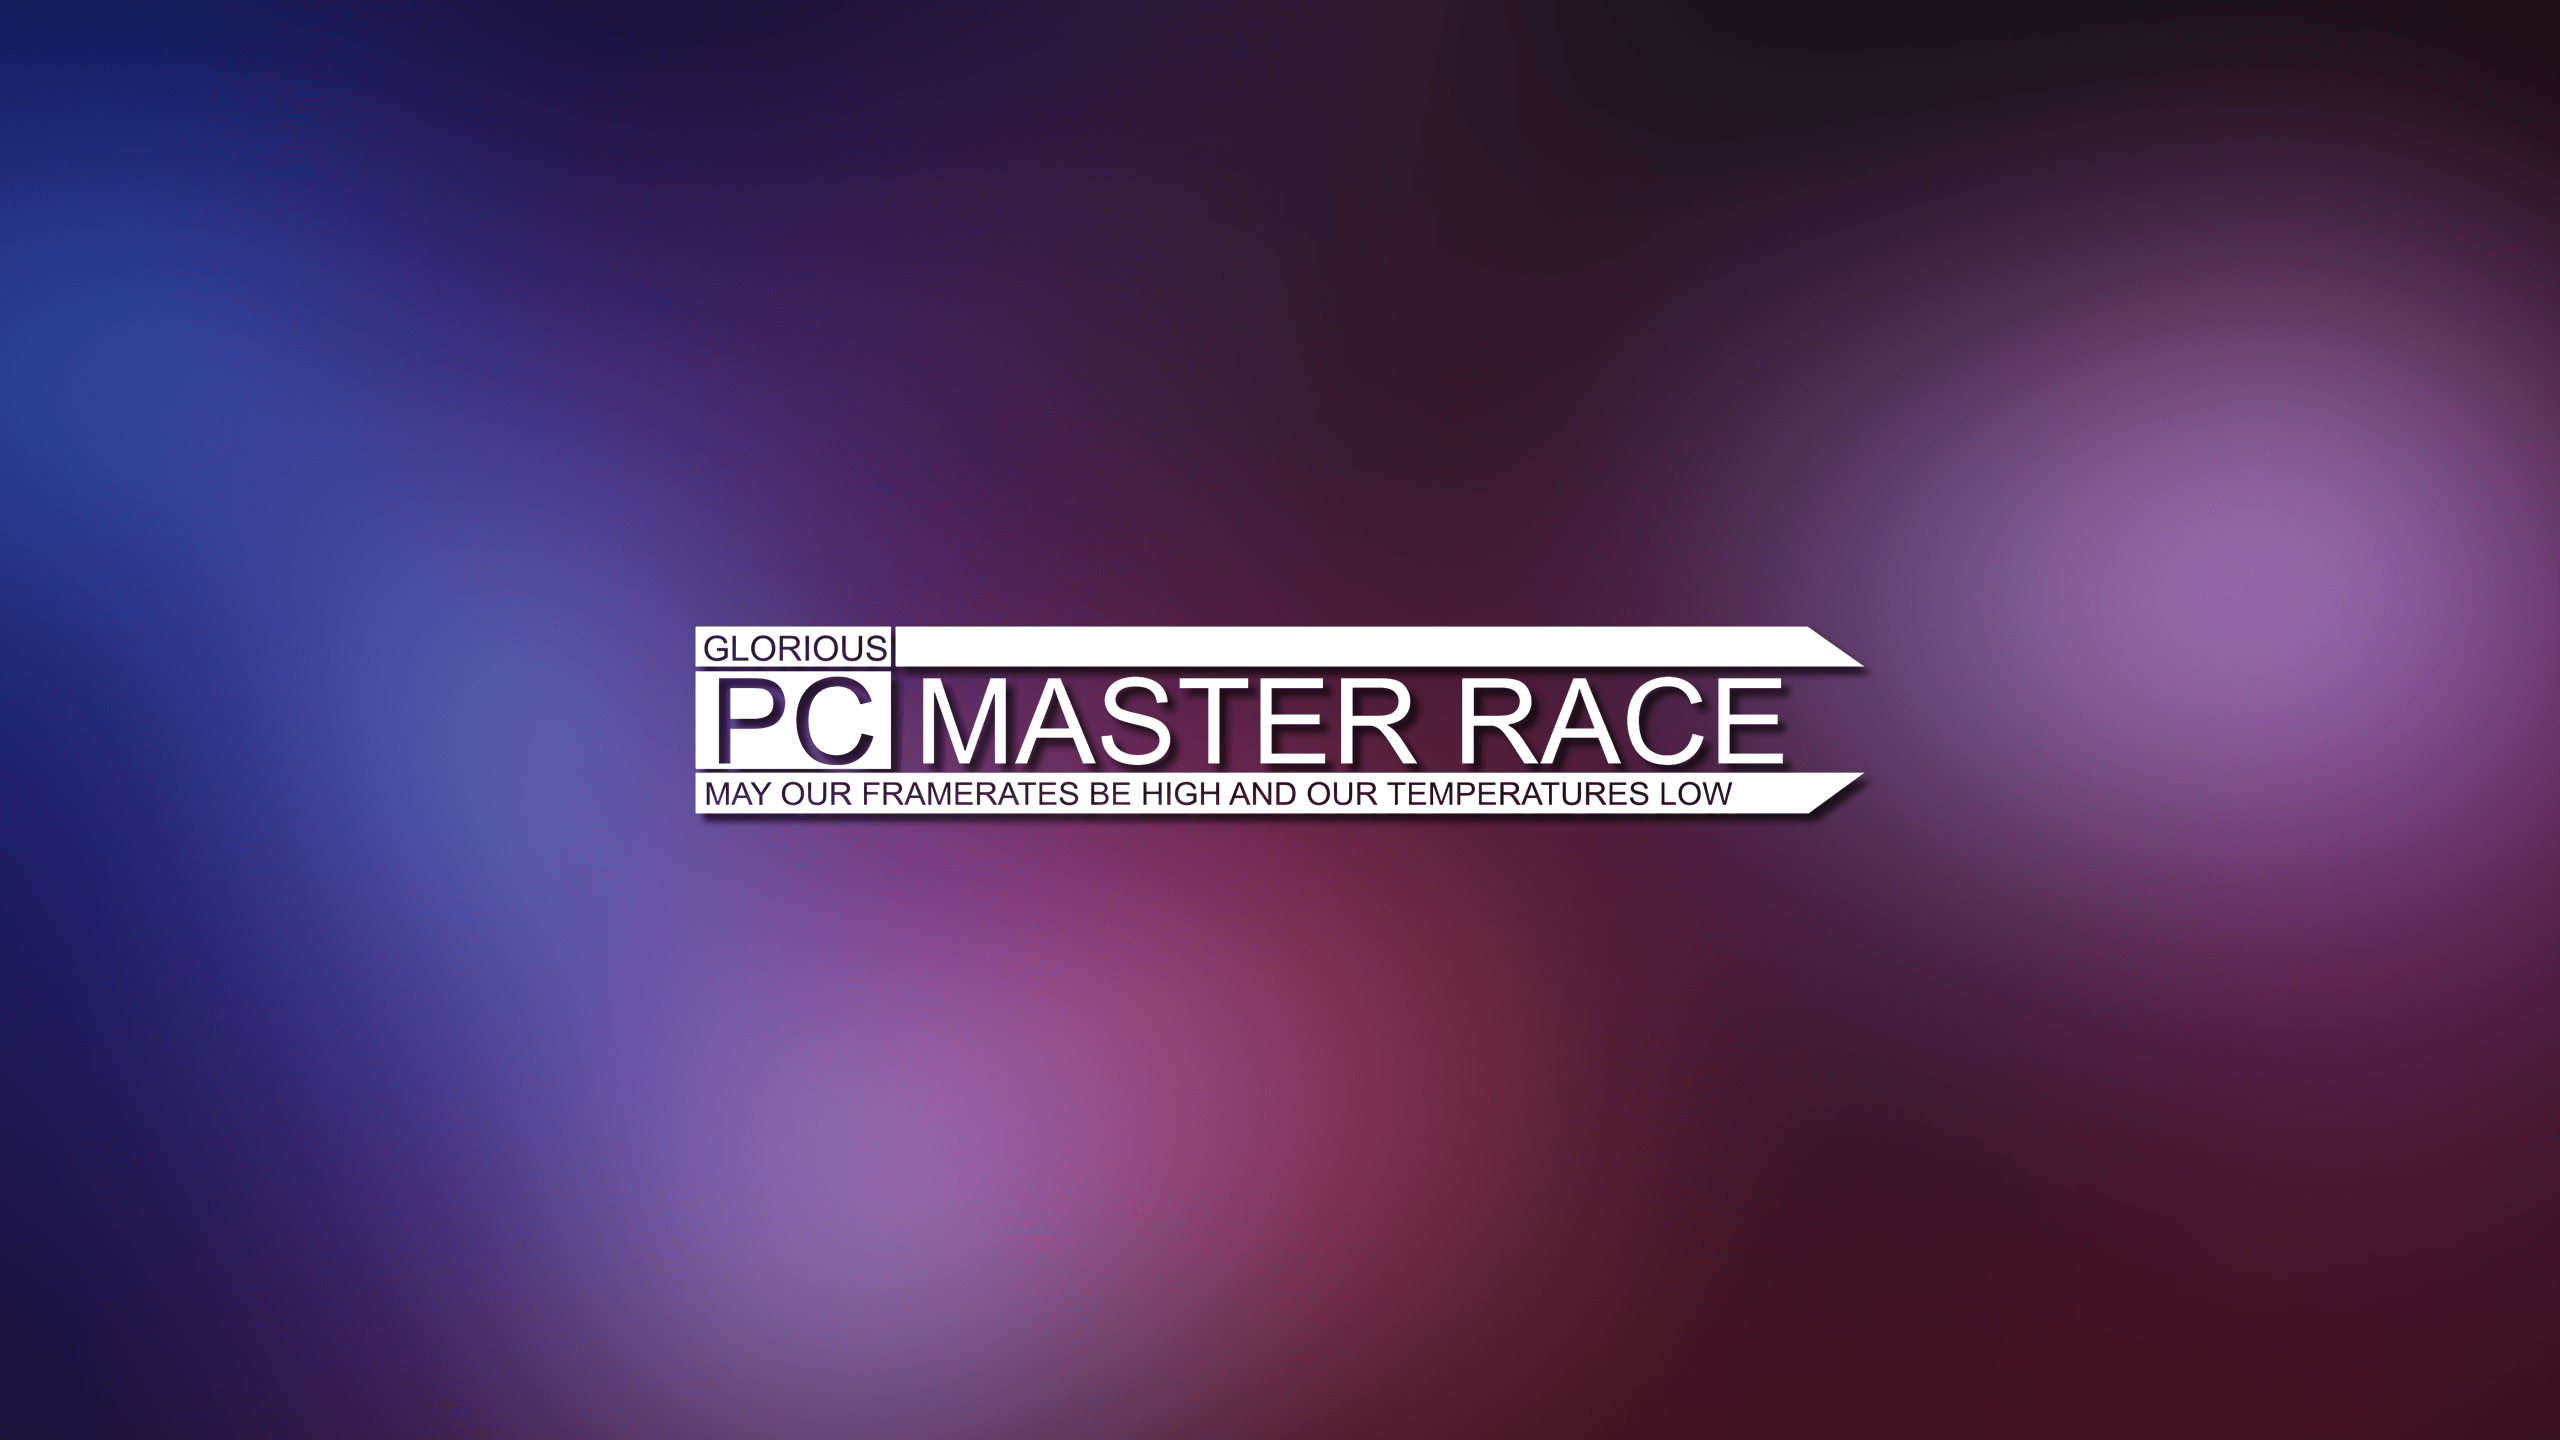 Pc Master Race Wallpapers 4k Hd Pc Master Race Backgrounds On